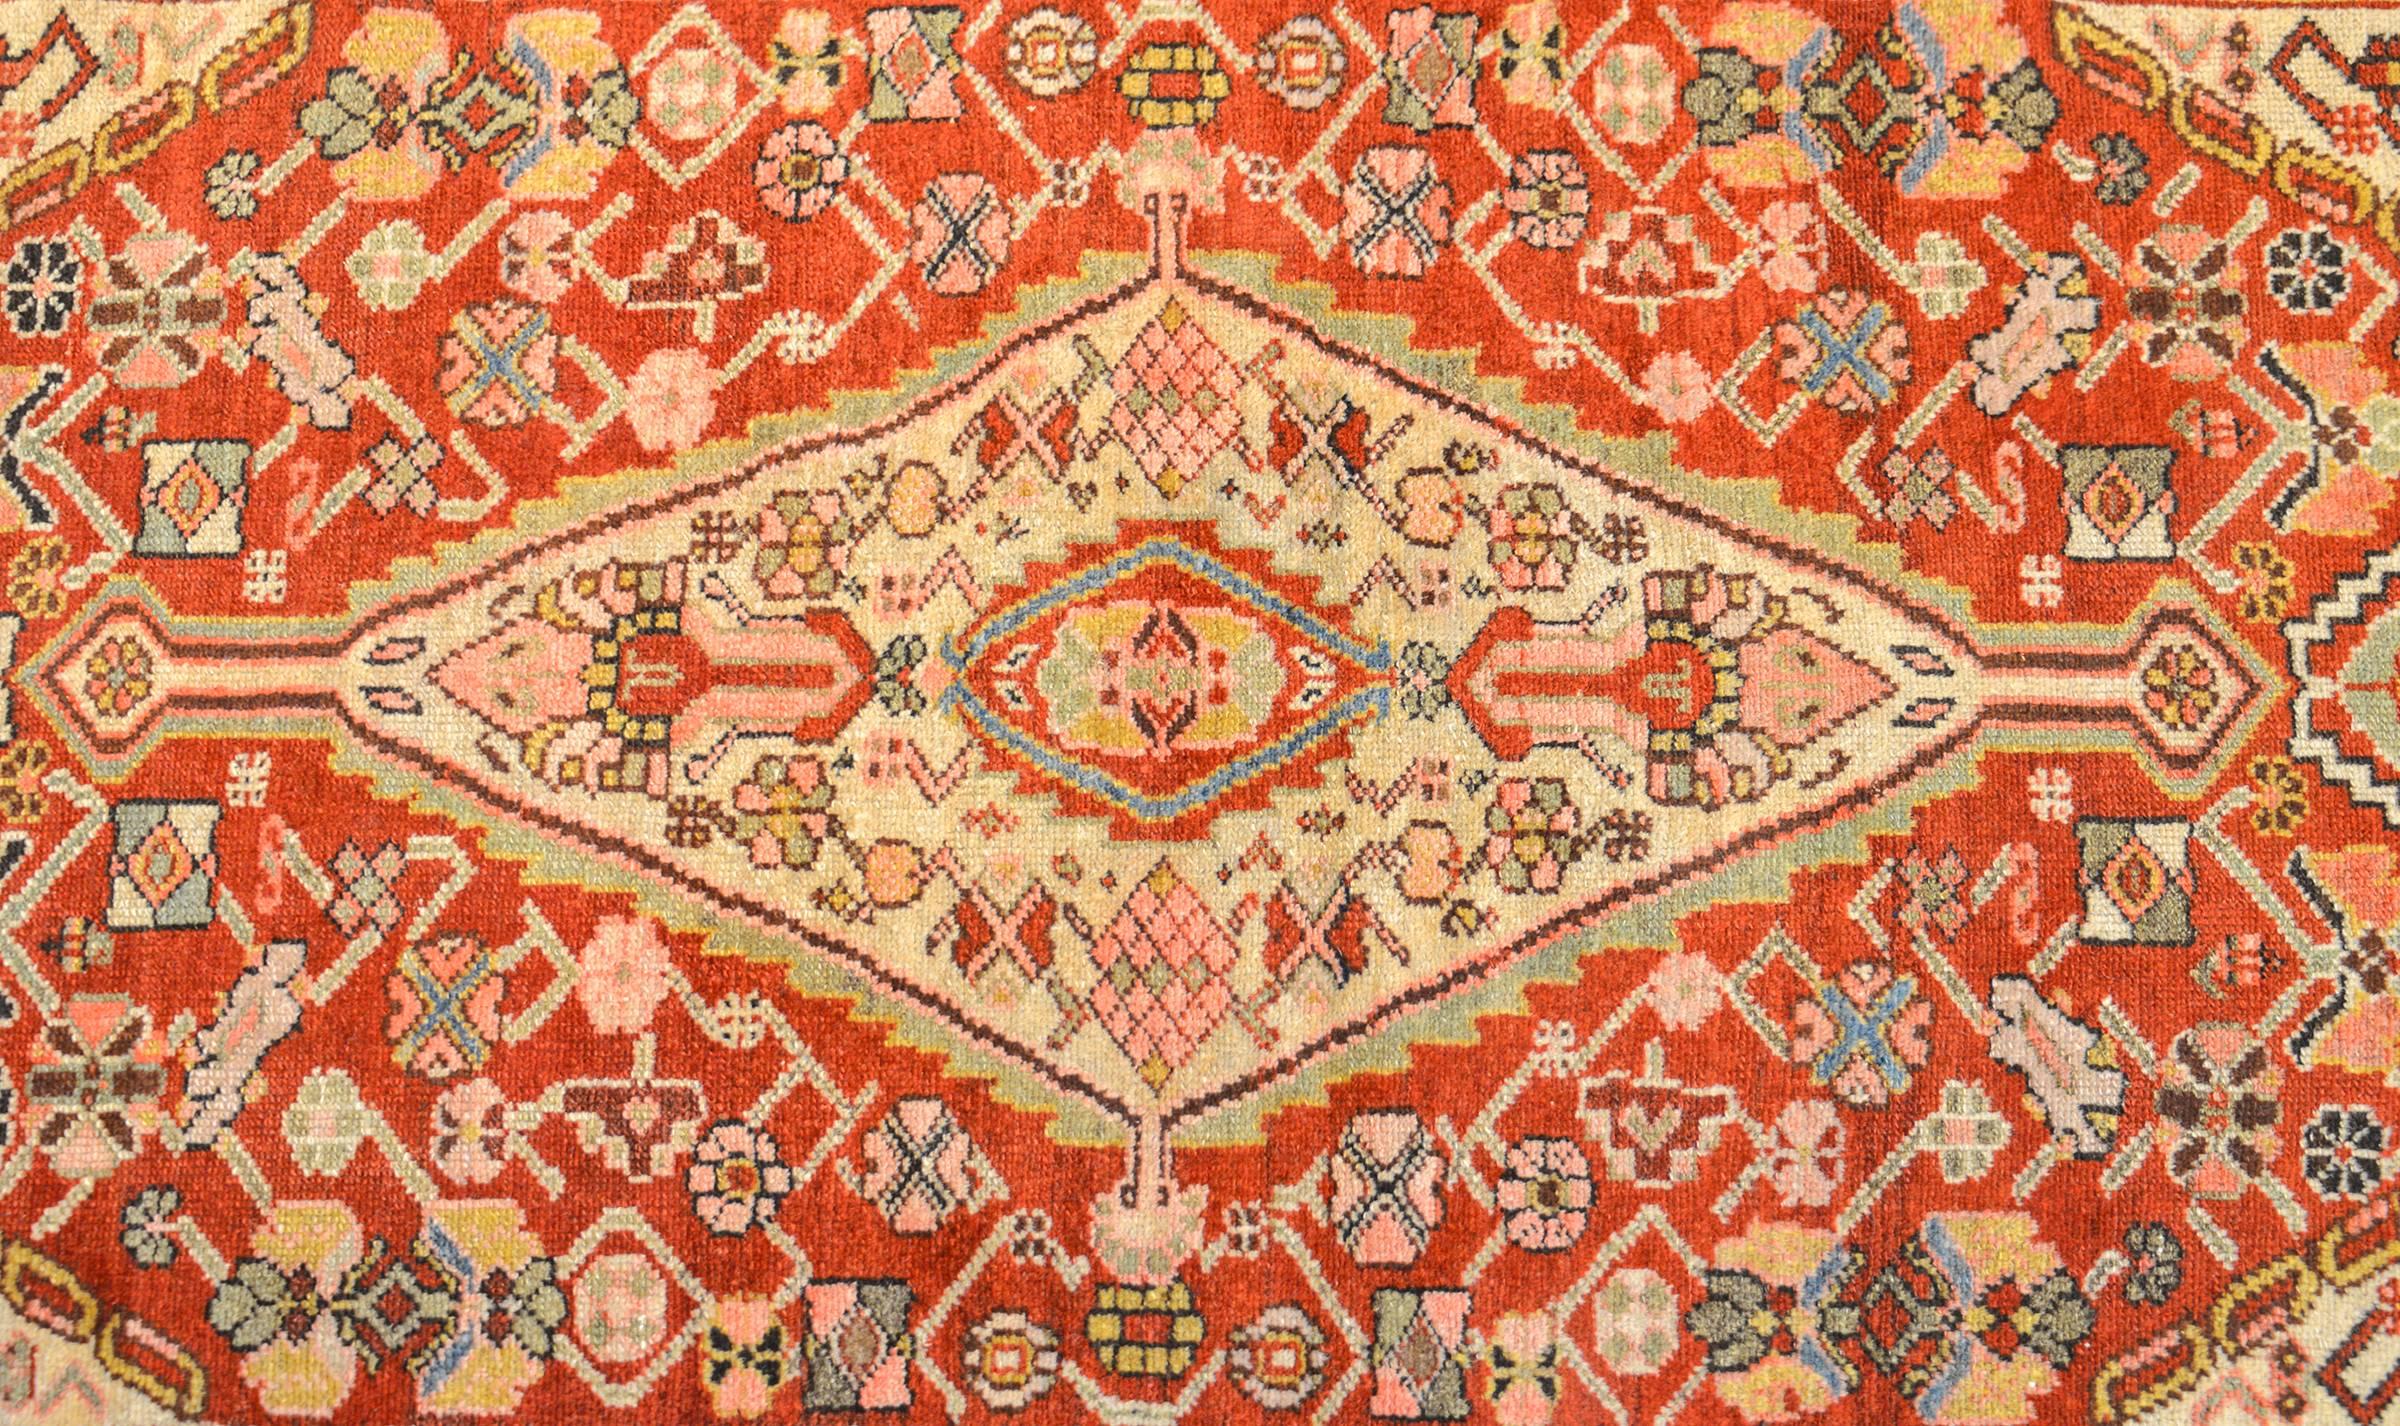 An extraordinary late 19th century Persian Serab rug with an all-over multicolored stylized floral and vine pattern on a crimson background. The flowers are stunning in their, at time, geometric, rendering. The borders is complex consisting of one